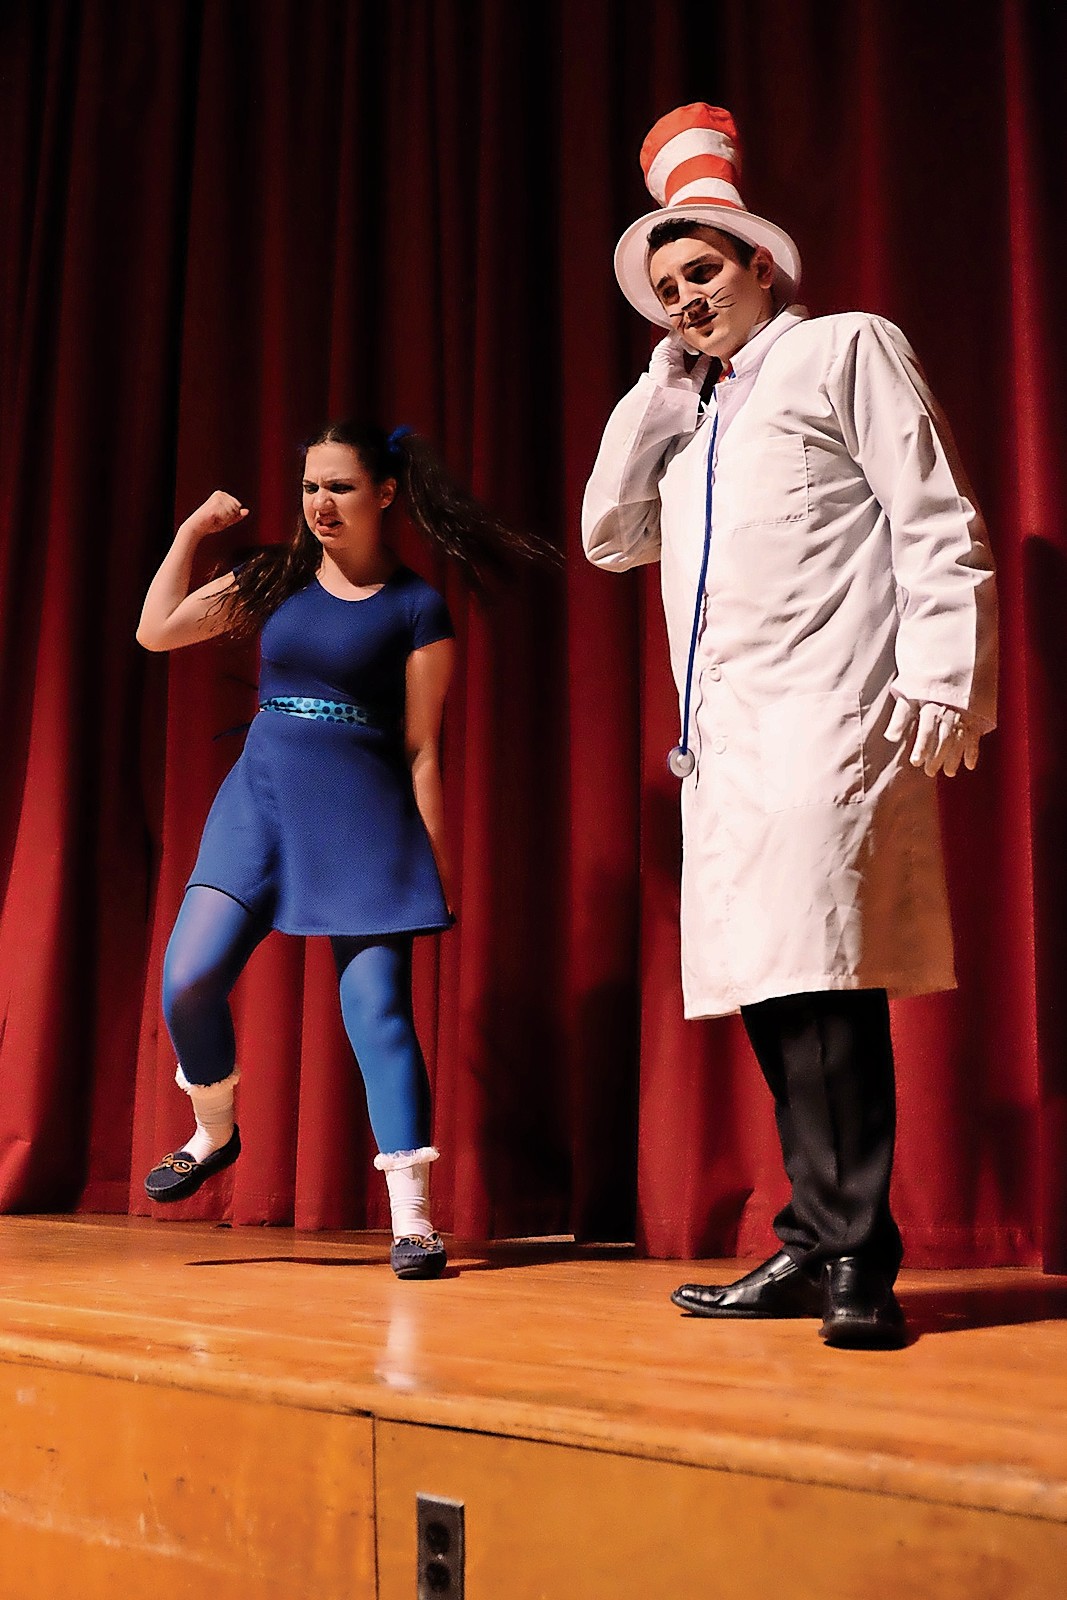 Sophomore Rebecca Goldfarb and senior Dean Klebonas, who played Gertrude McFuzz and the Cat in the Hat, respectively, stole the show during Oceanside High School’s performances of “Seussical the Musical” on Jan. 4, after stepping in for lead actors who were sick.